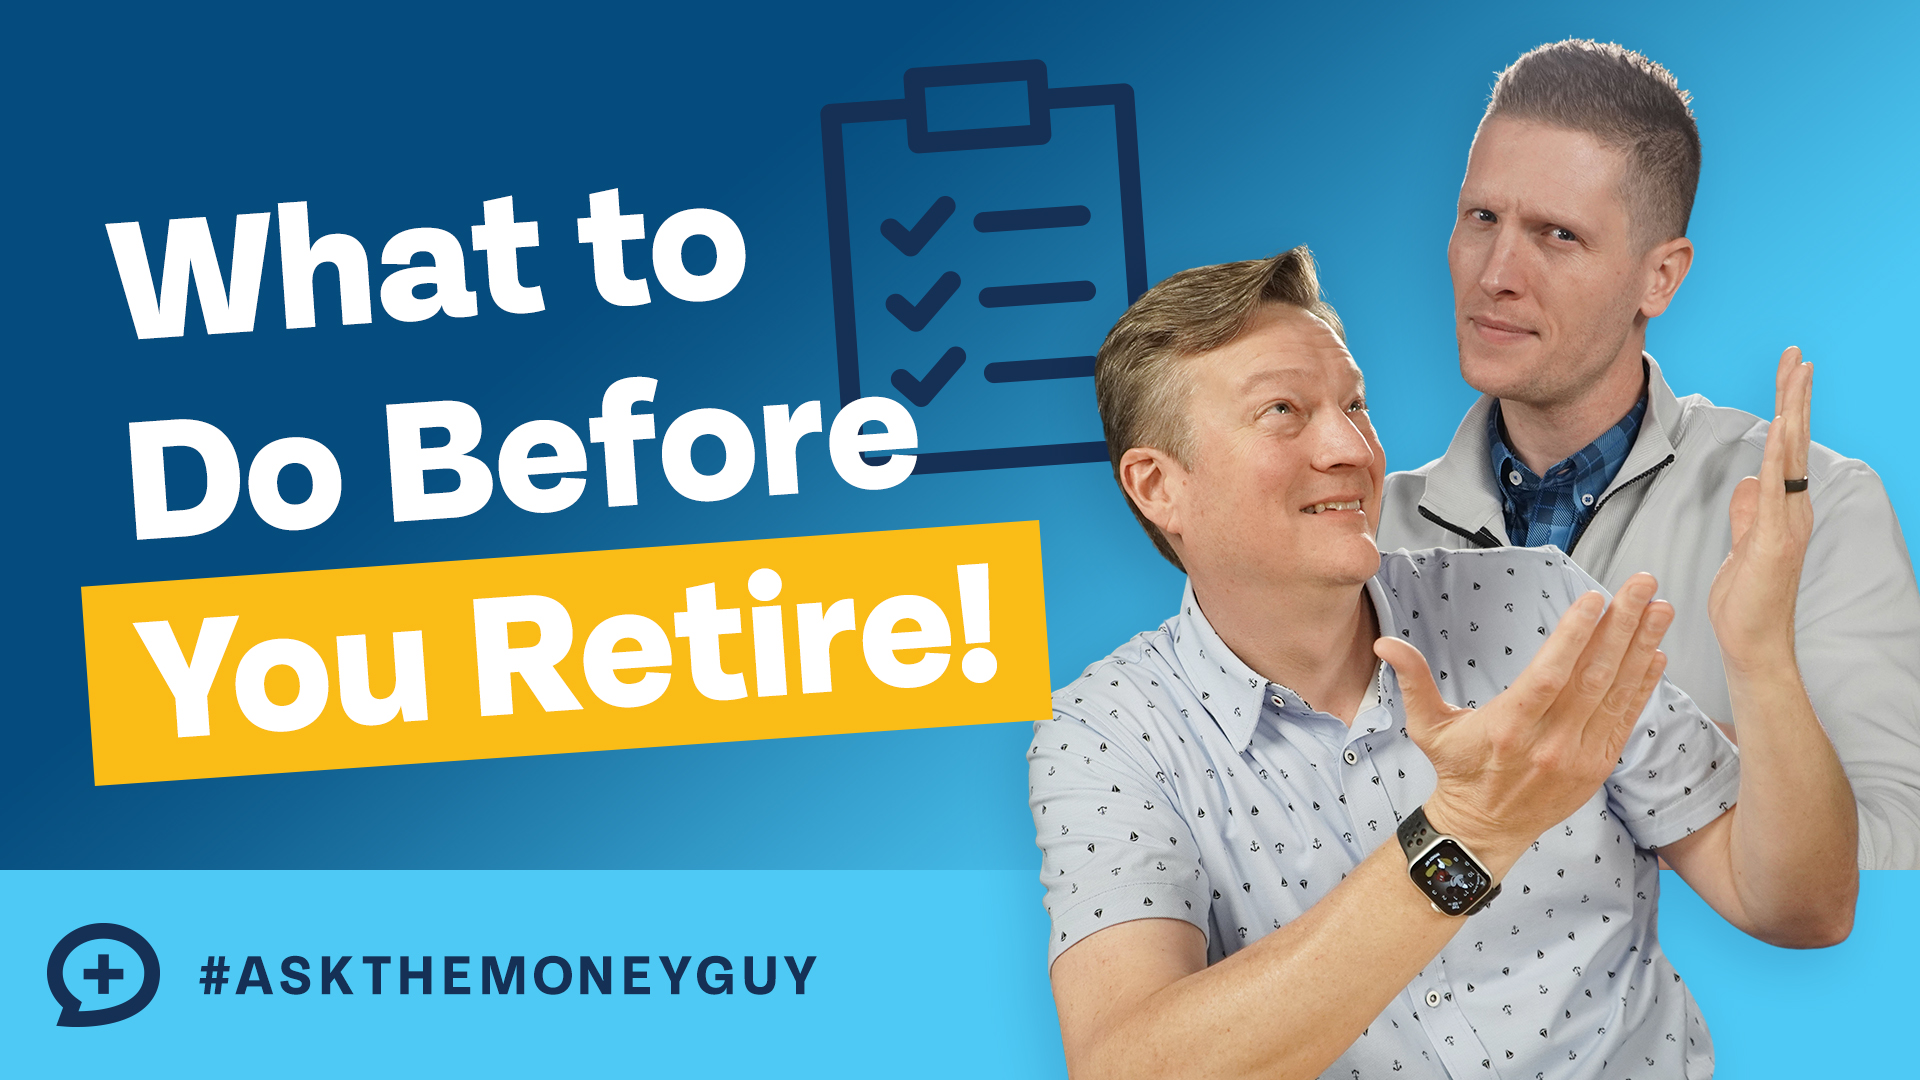 LIVE ASK WhatToDoBeforeRetire